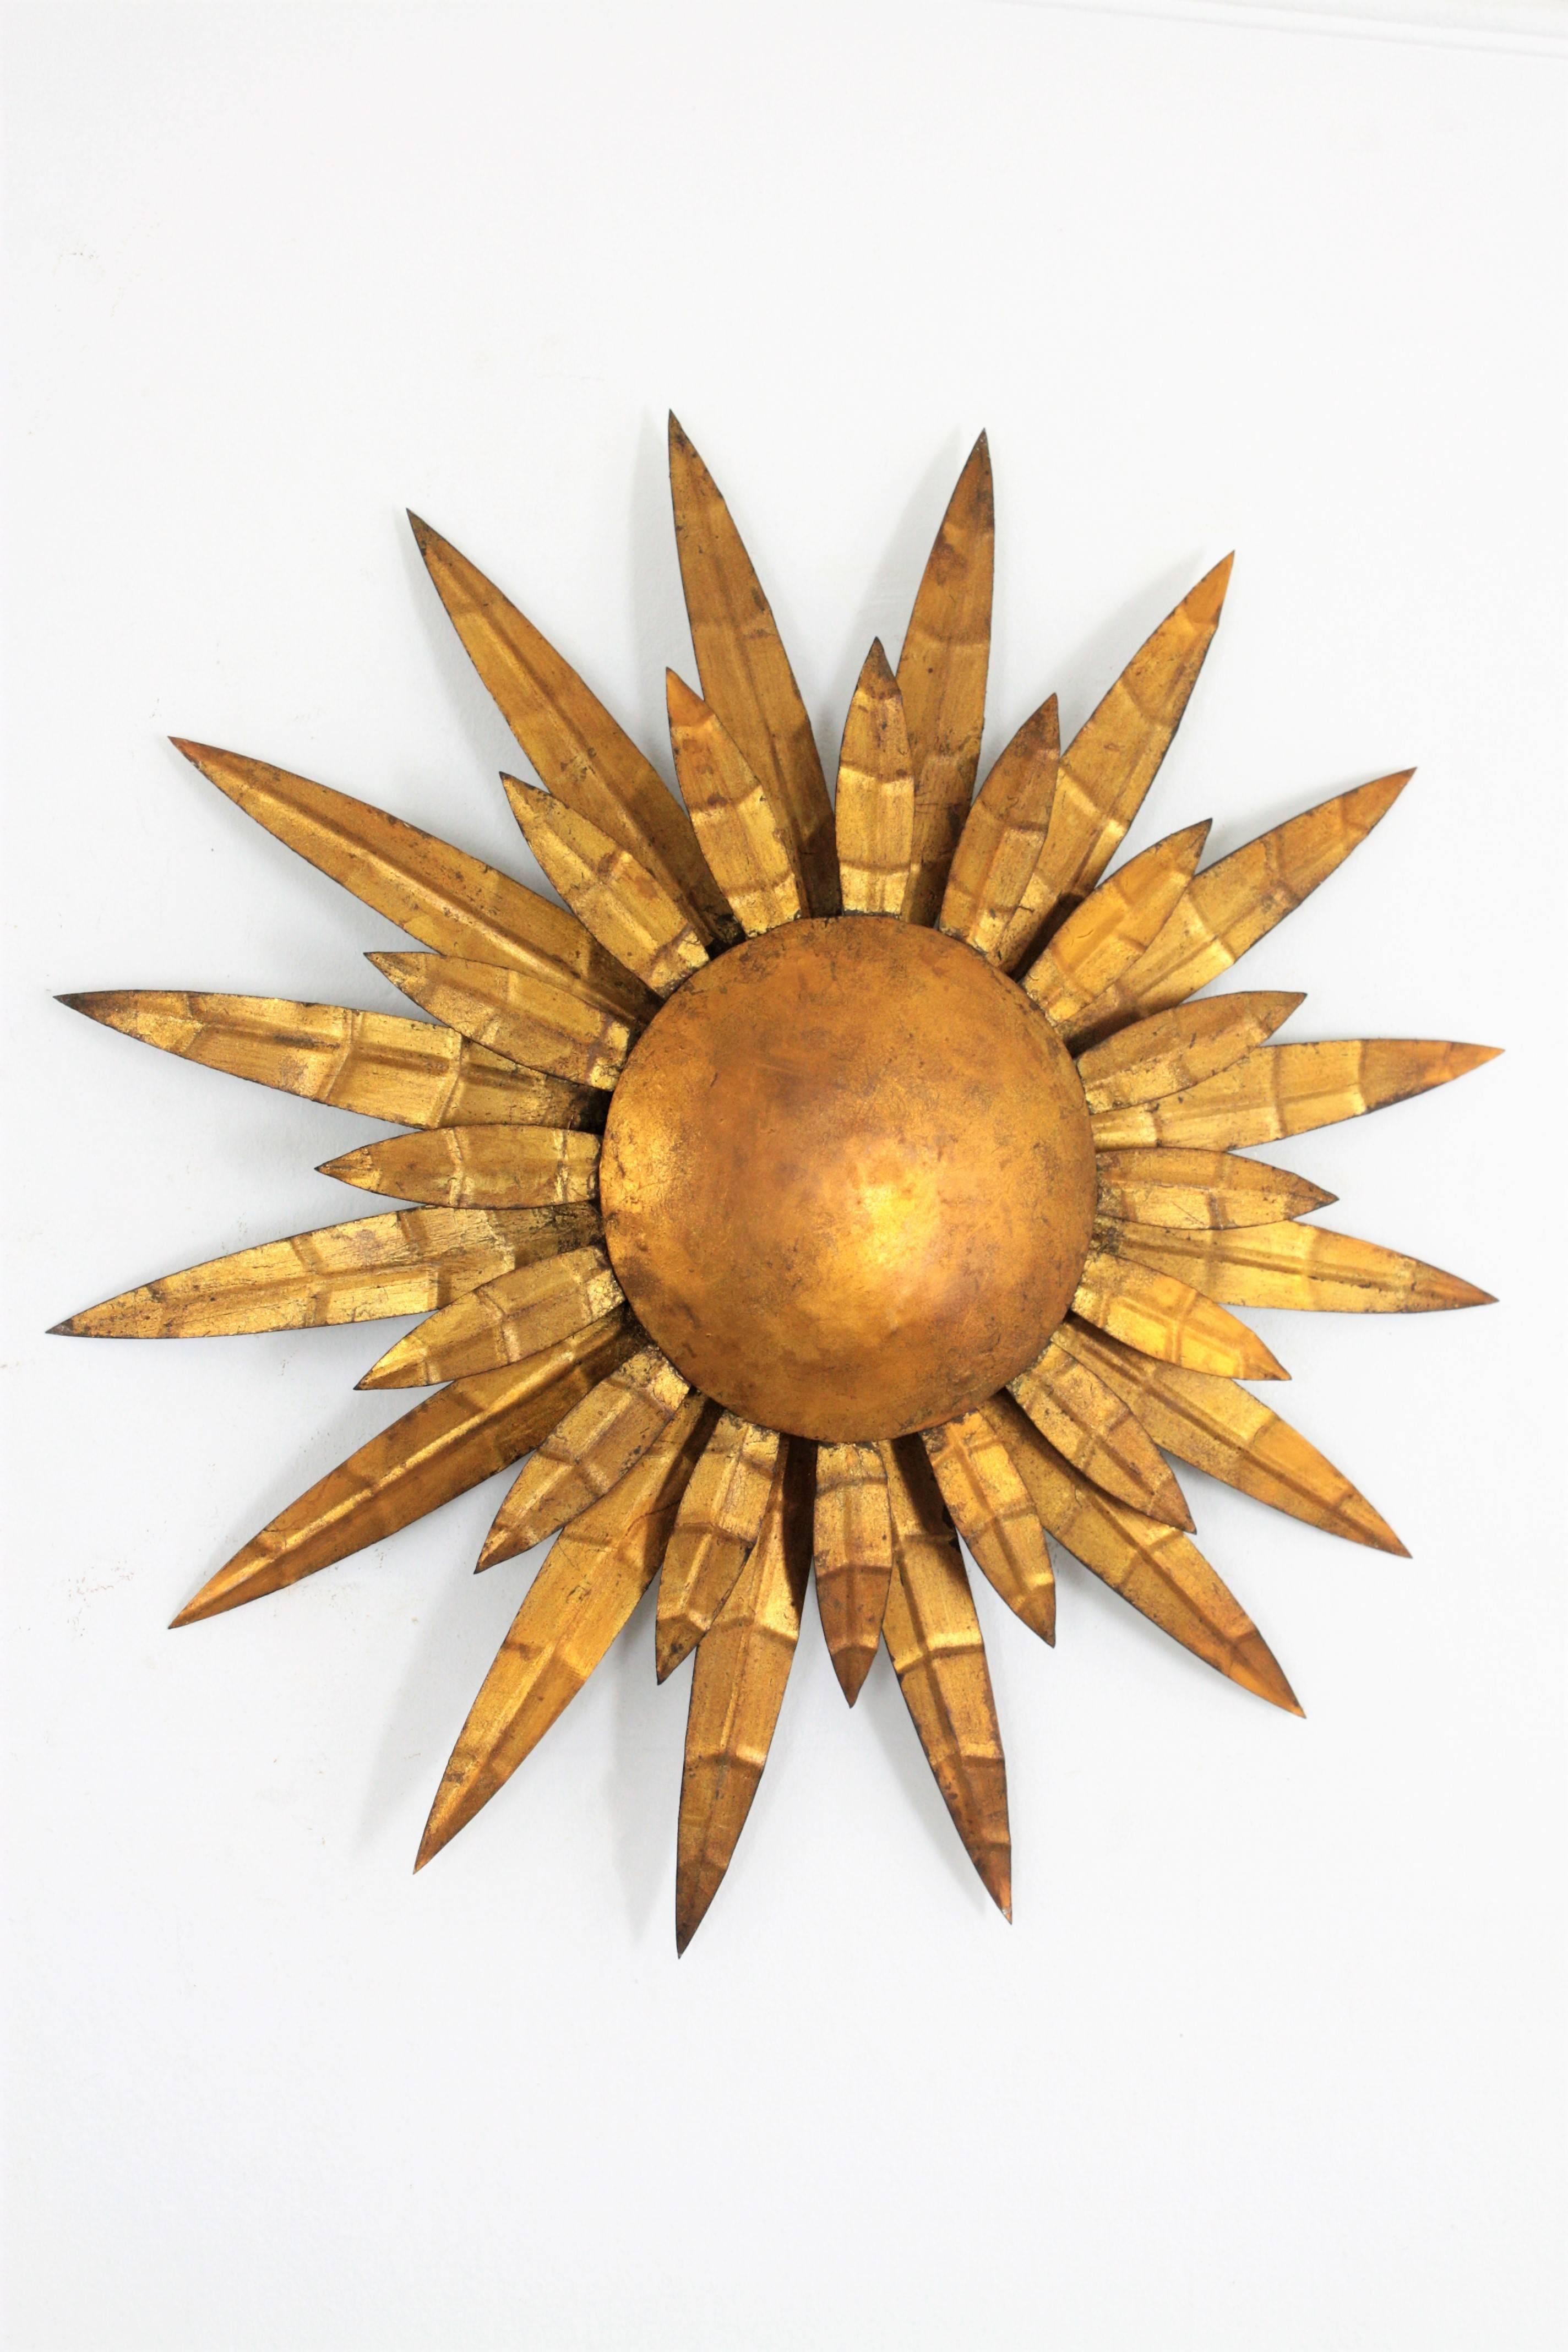 Hollywood Regency French 1950s Gilt Iron Sunburst Ceiling Sconce Wall Light or Wall Decoration